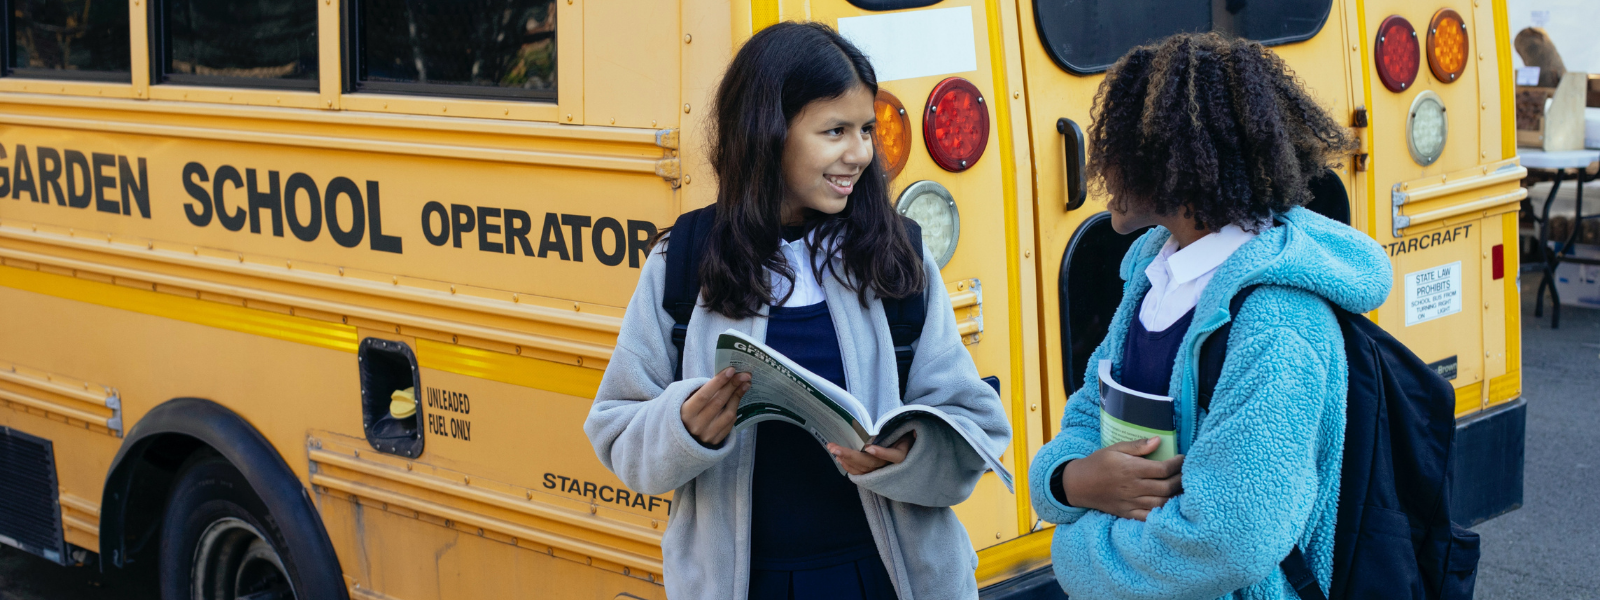 two girls with backpacks in front of a school bus